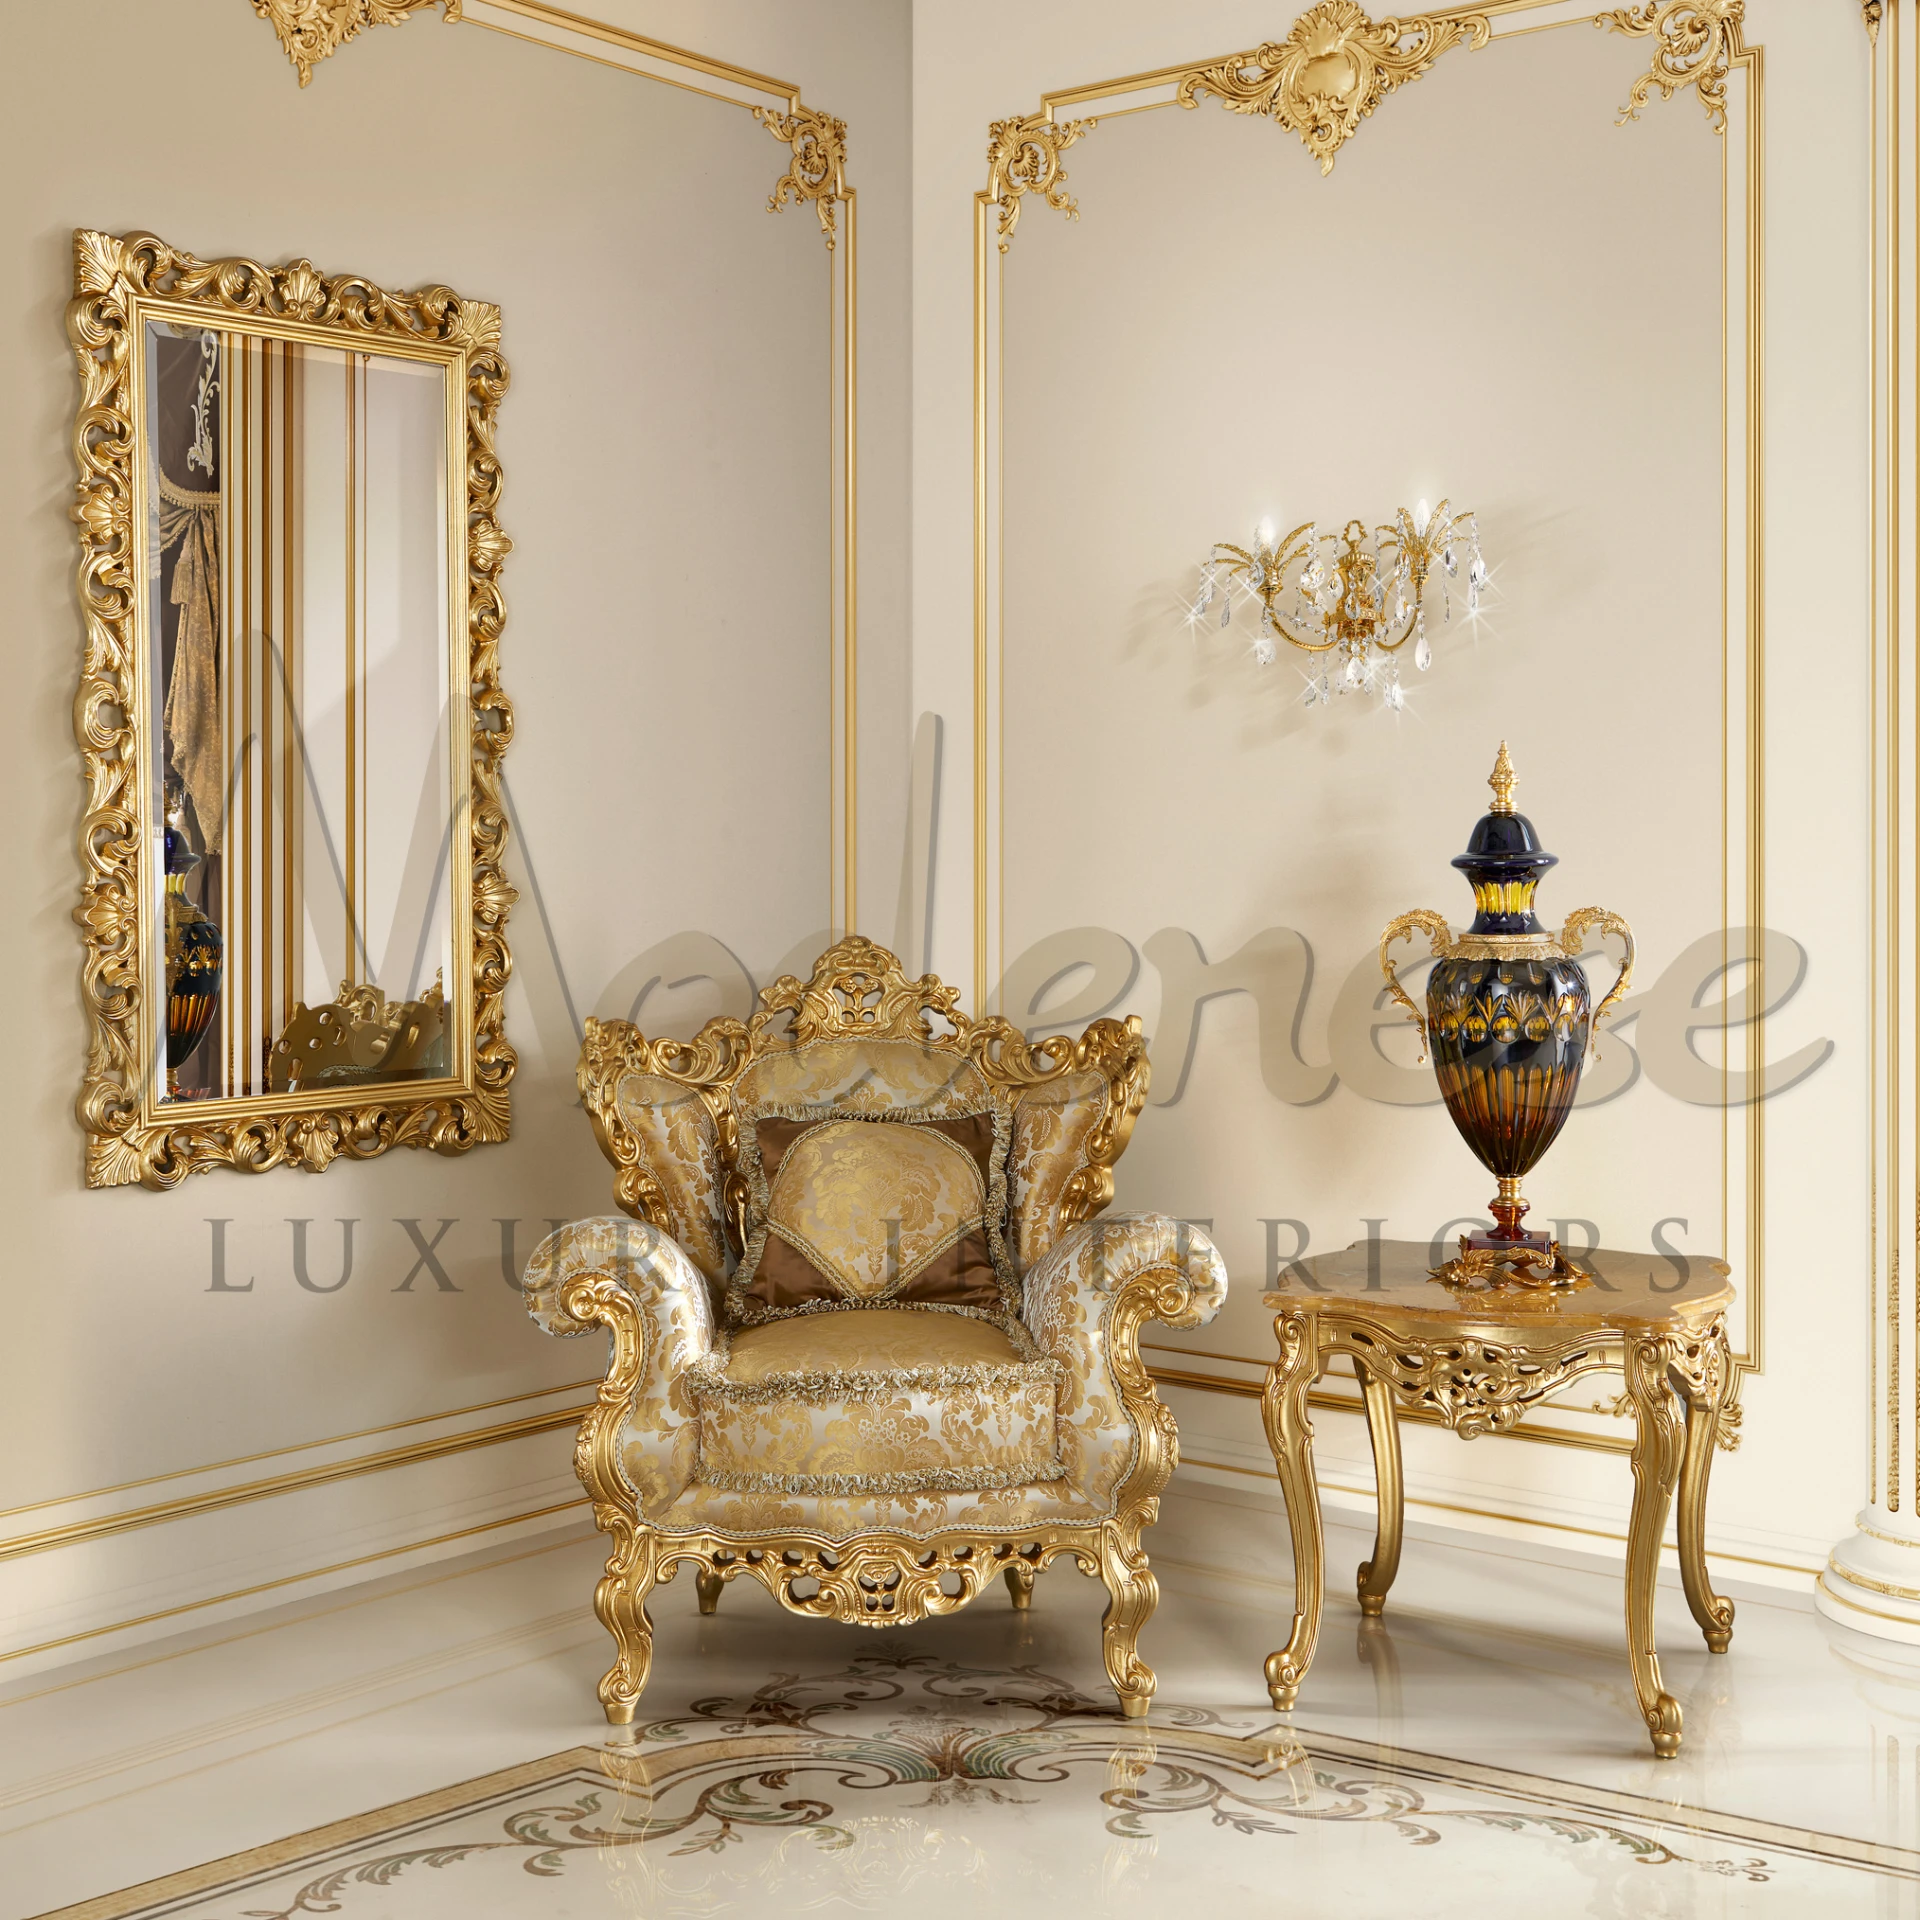 Luxurious and classic, the Noble Figured Mirror is the epitome of custom mirror design, perfect for creating an elegant focal point in a room.